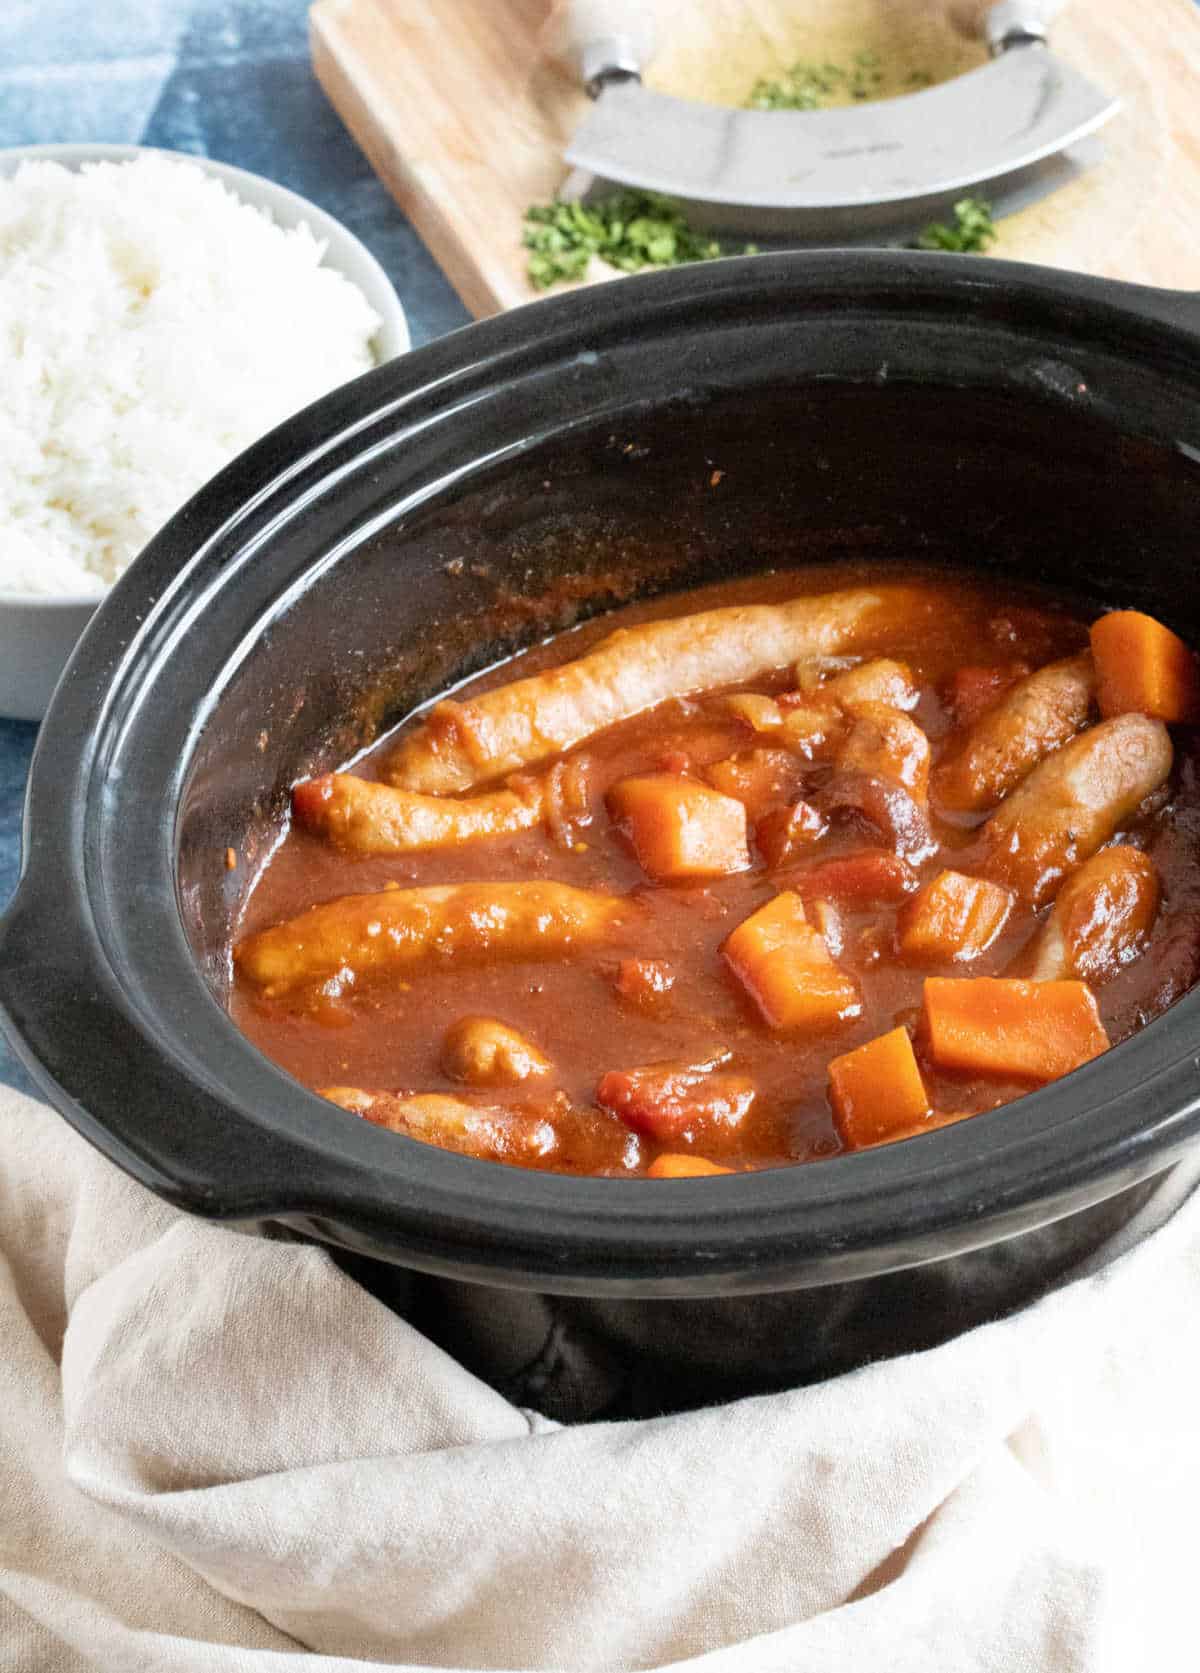 Sausage casserole in a slow cooker basin.